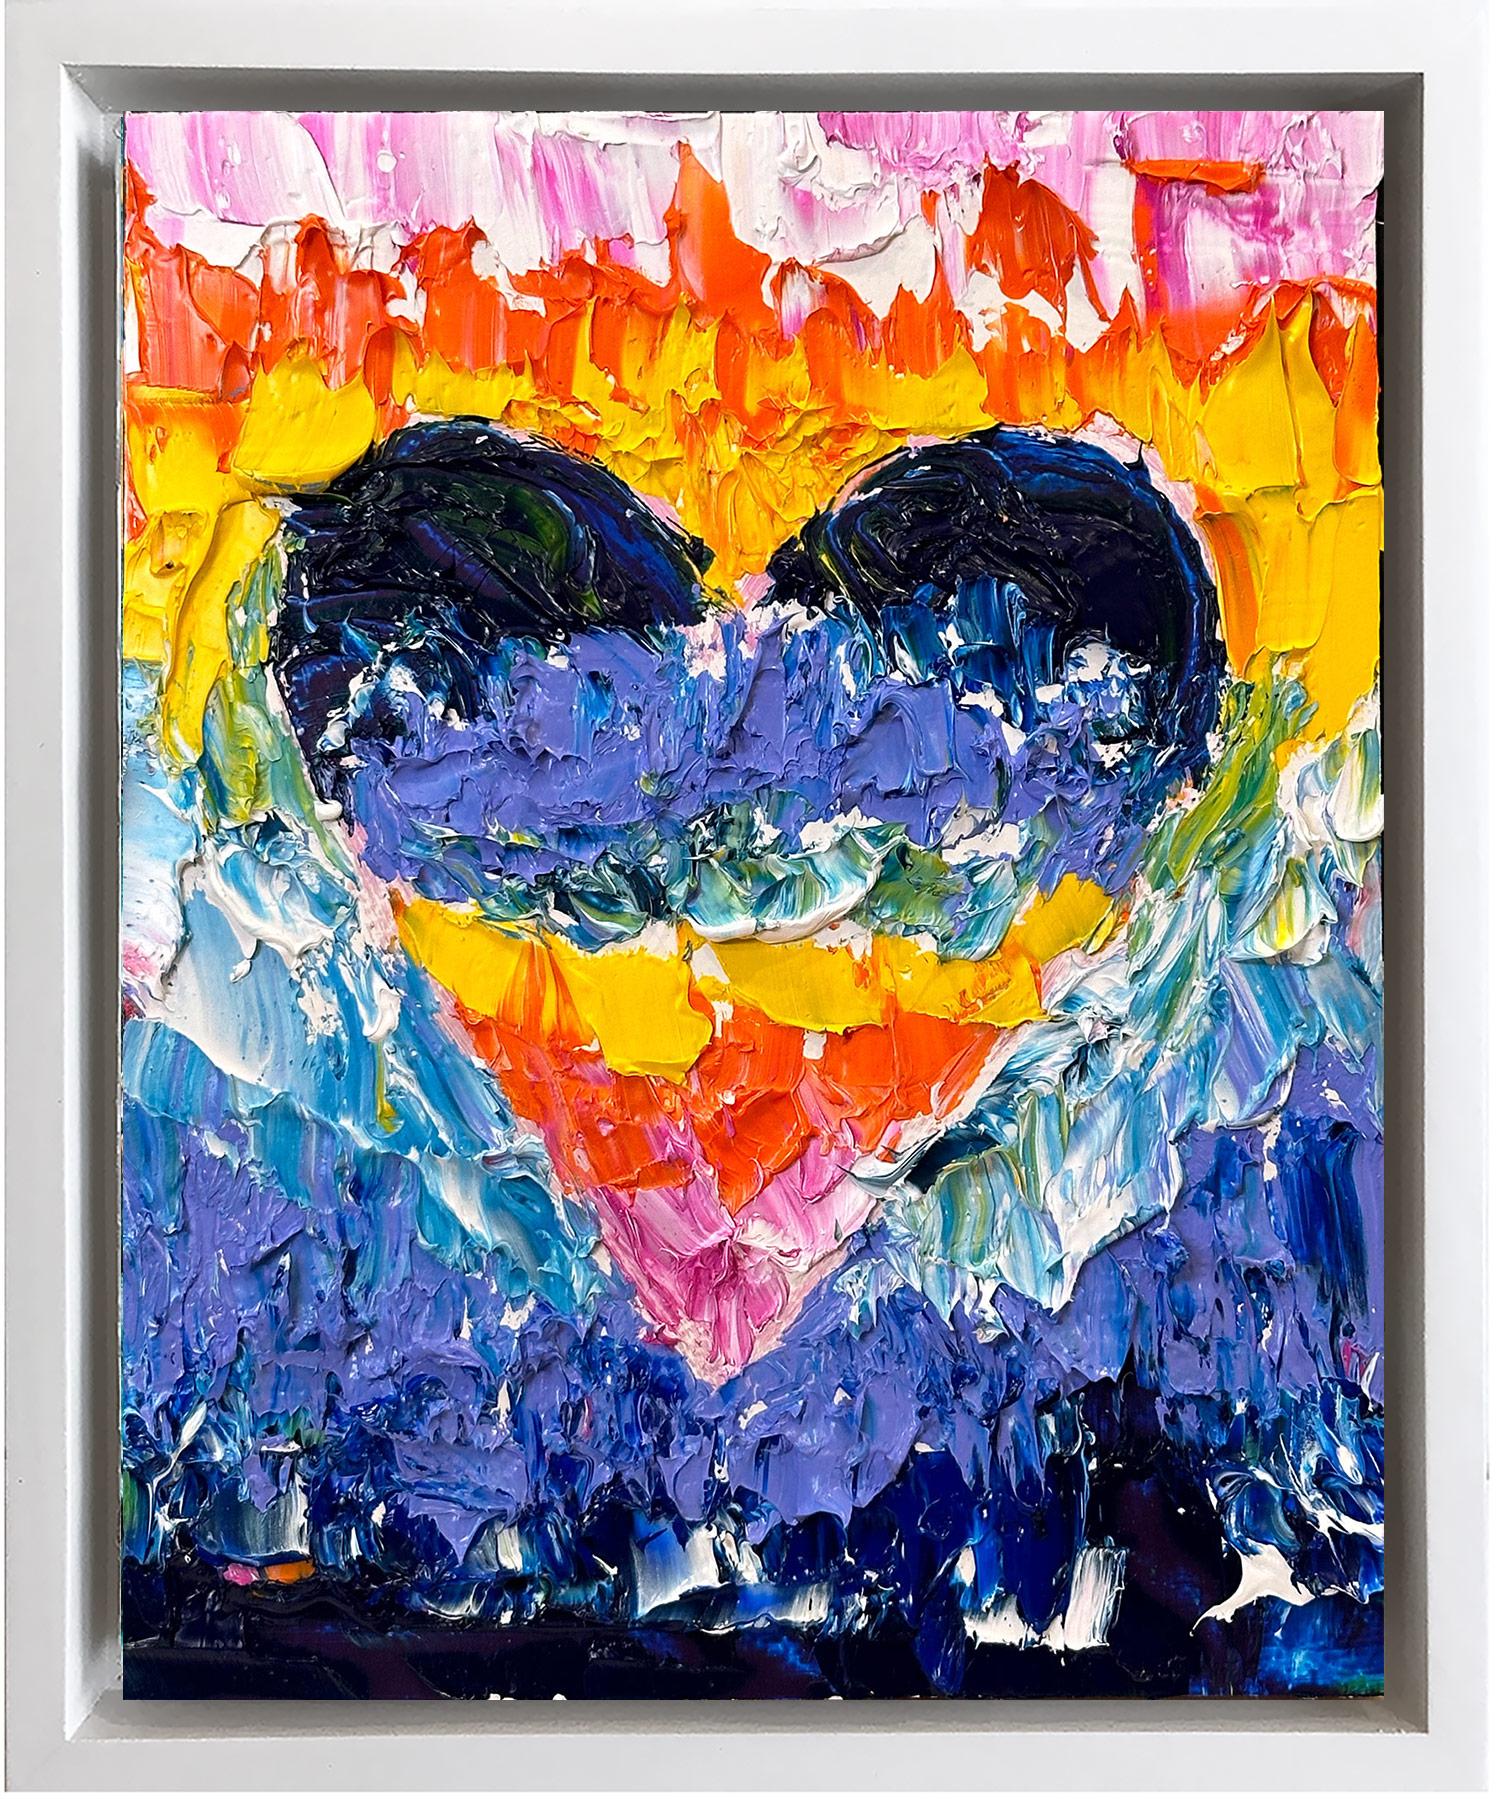 Cindy Shaoul Abstract Painting - "My Earth Wind & Fire Heart" Colorful Pop Art Oil Painting w White Floater Frame